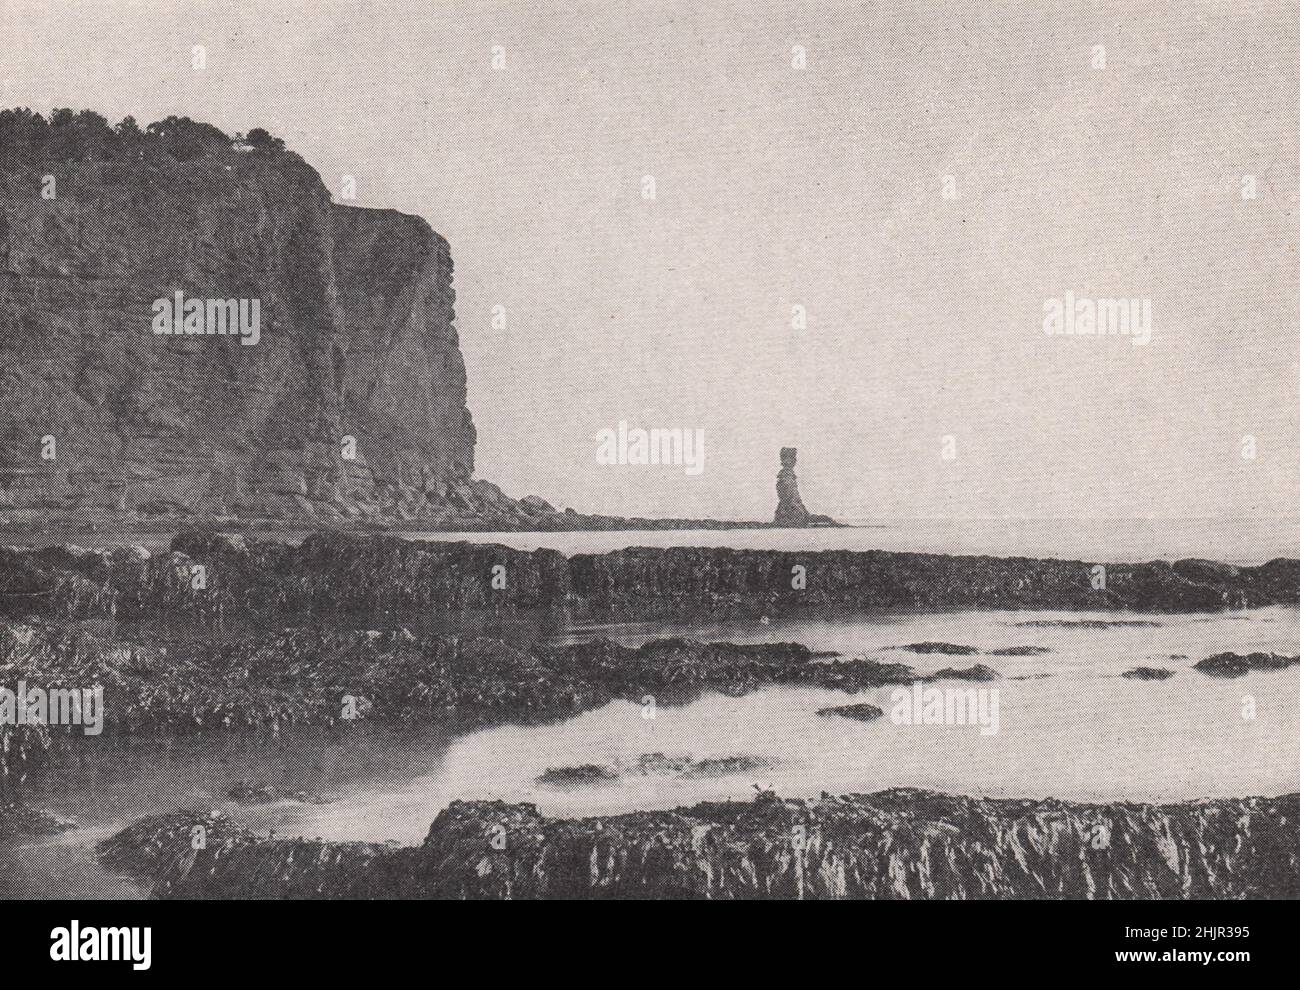 Dawlish, the red cliffs of glorious Devon and a stone sentinel. England (1923) Stock Photo